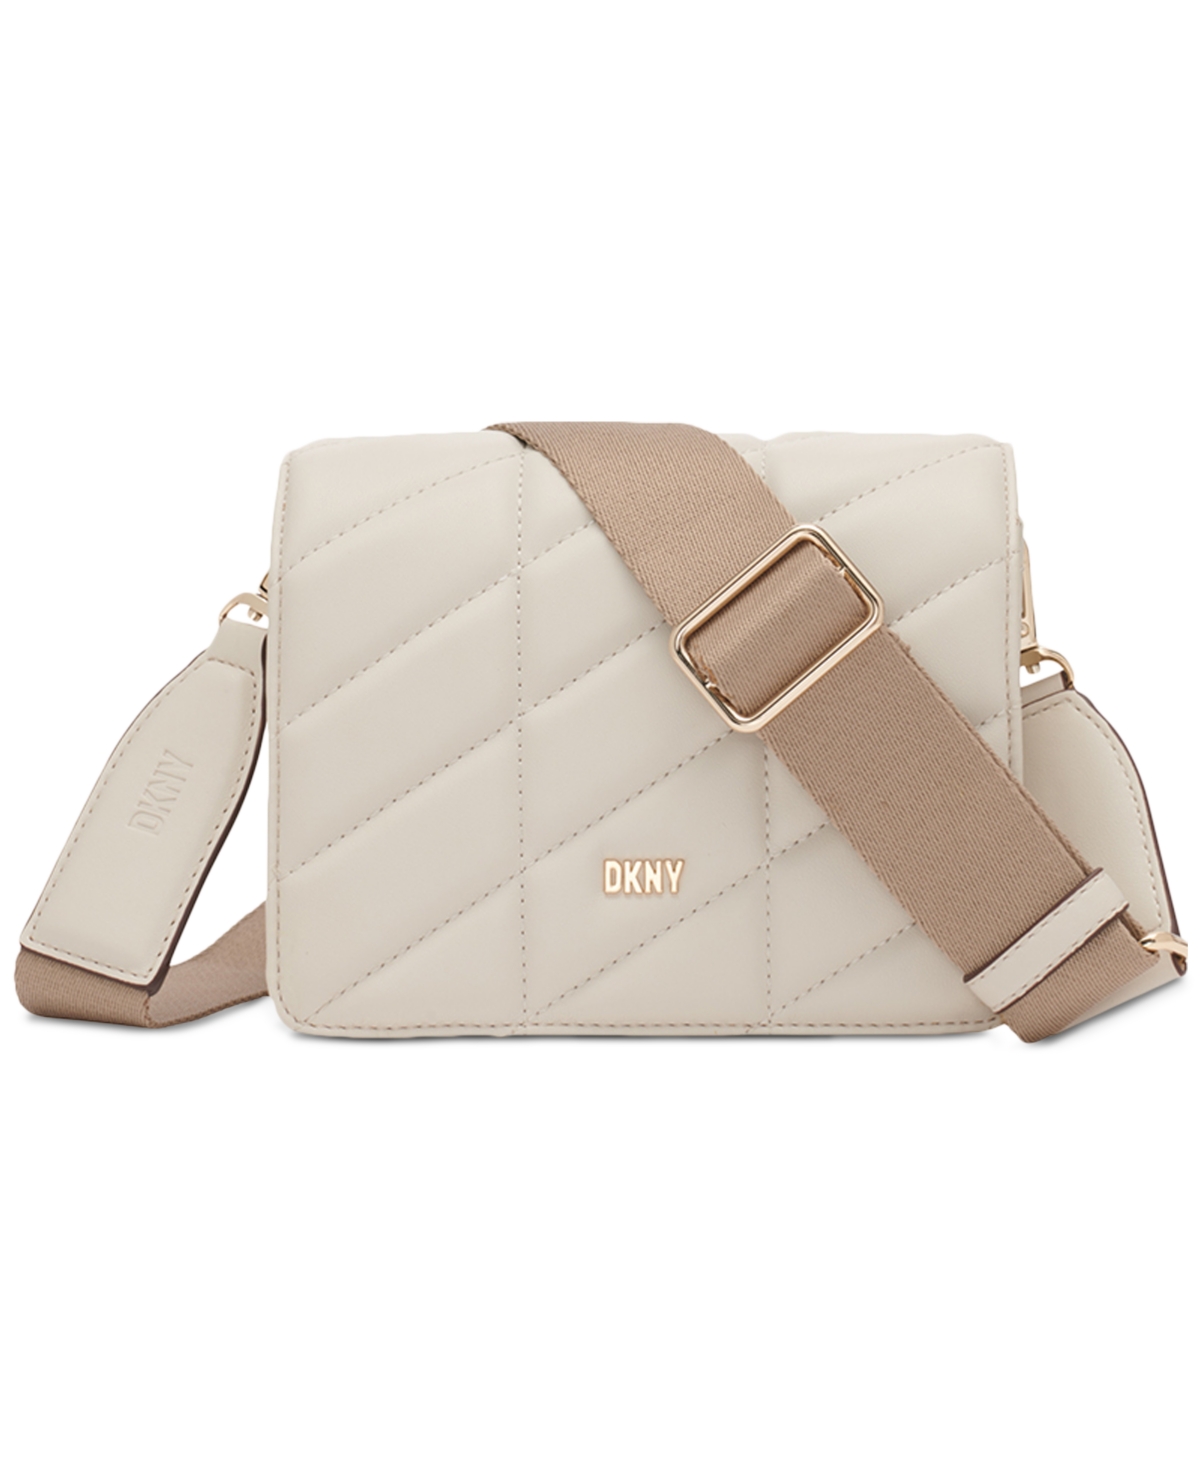 Dkny Bodhi Flap Quilted Mini Crossbody In Pebble